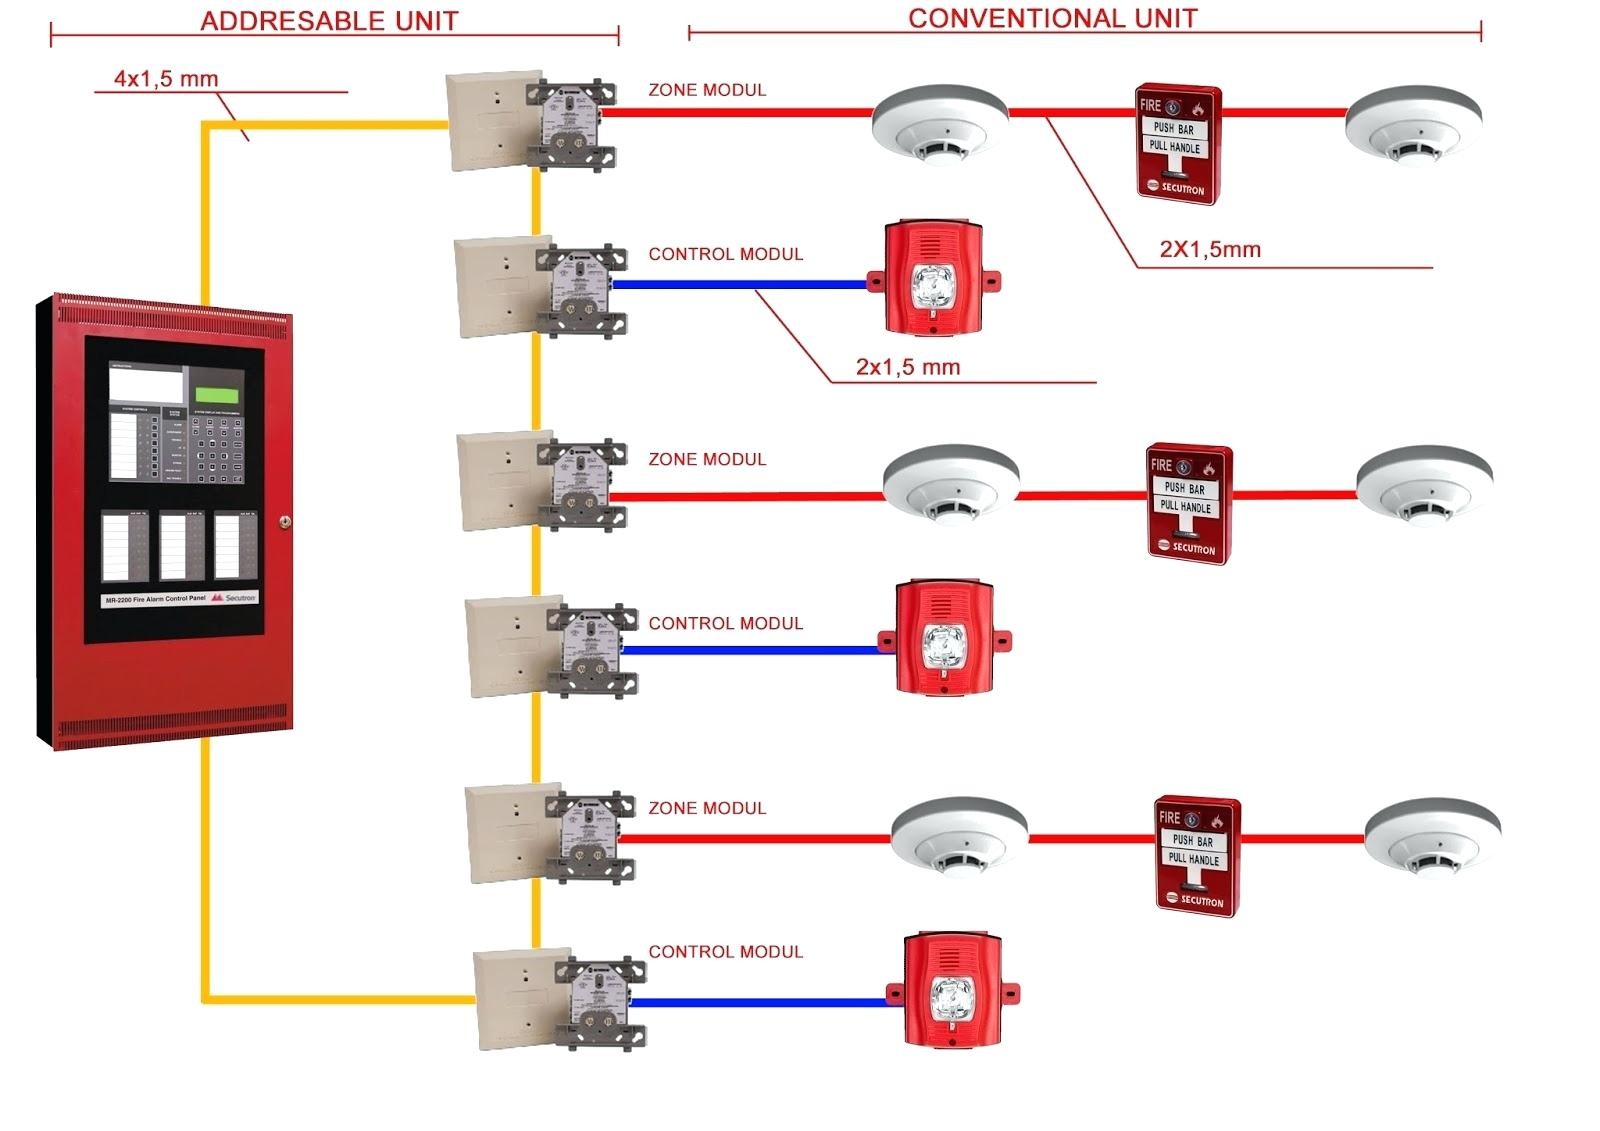 Wiring Diagram For Honeywell Thermostat Th6220d1002 Fire Alarm Addressable System Schematic Throughout Pdf In Fire Alarm Wiring Diagram